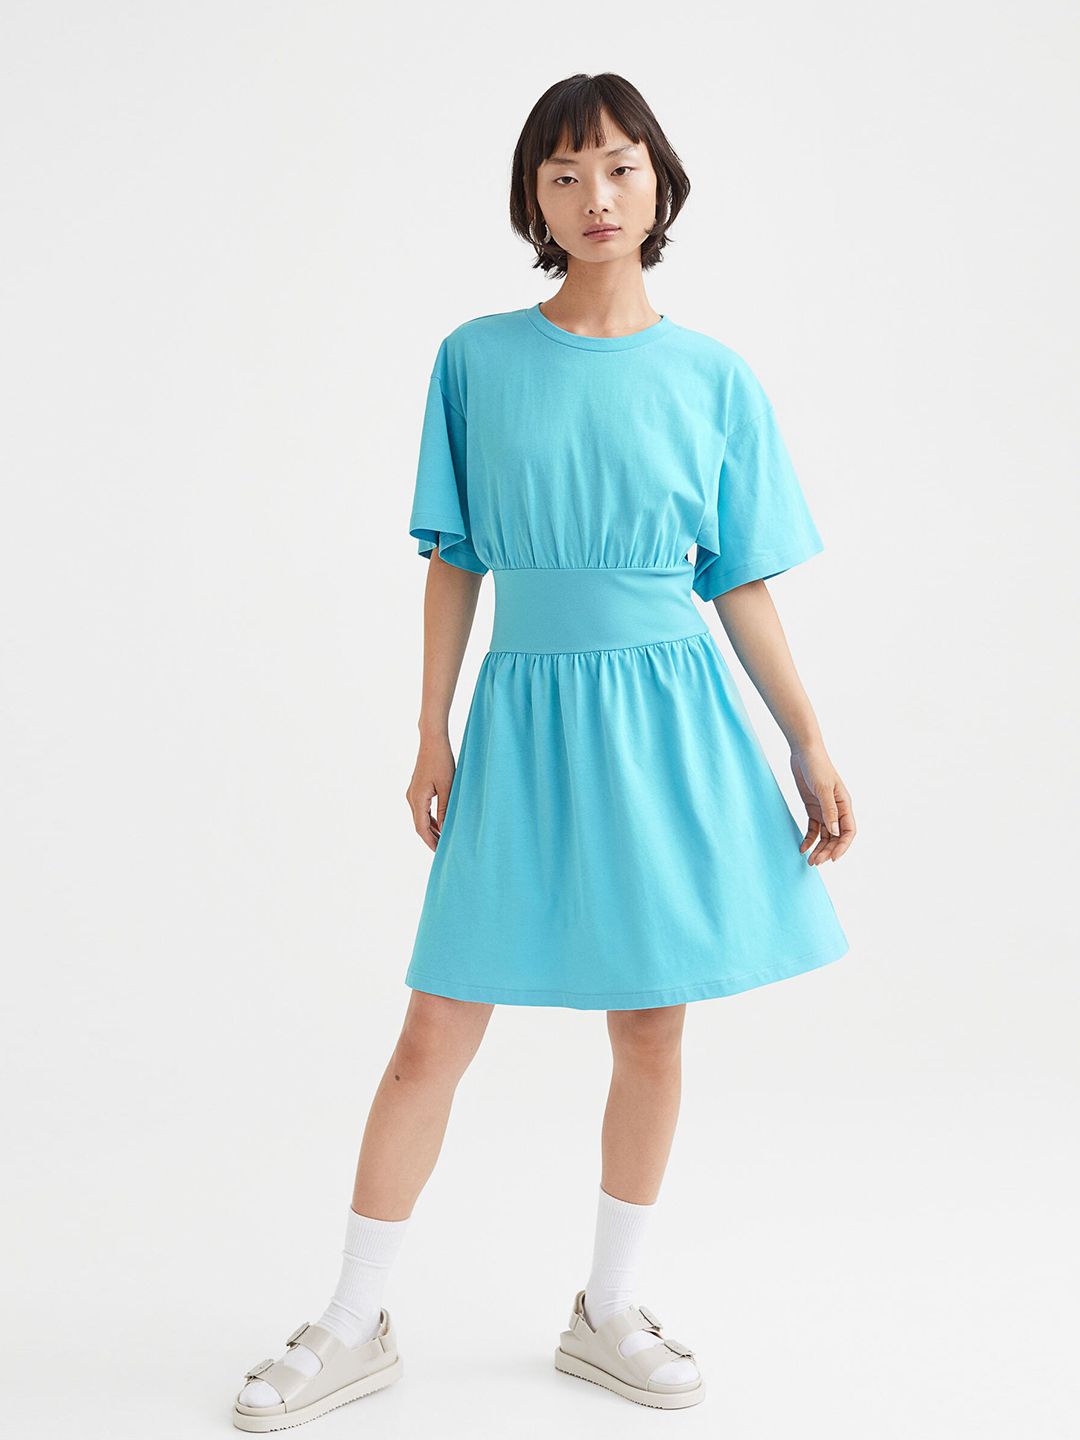 H&M Women Turquoise Blue Cotton T-shirt Dress Price in India